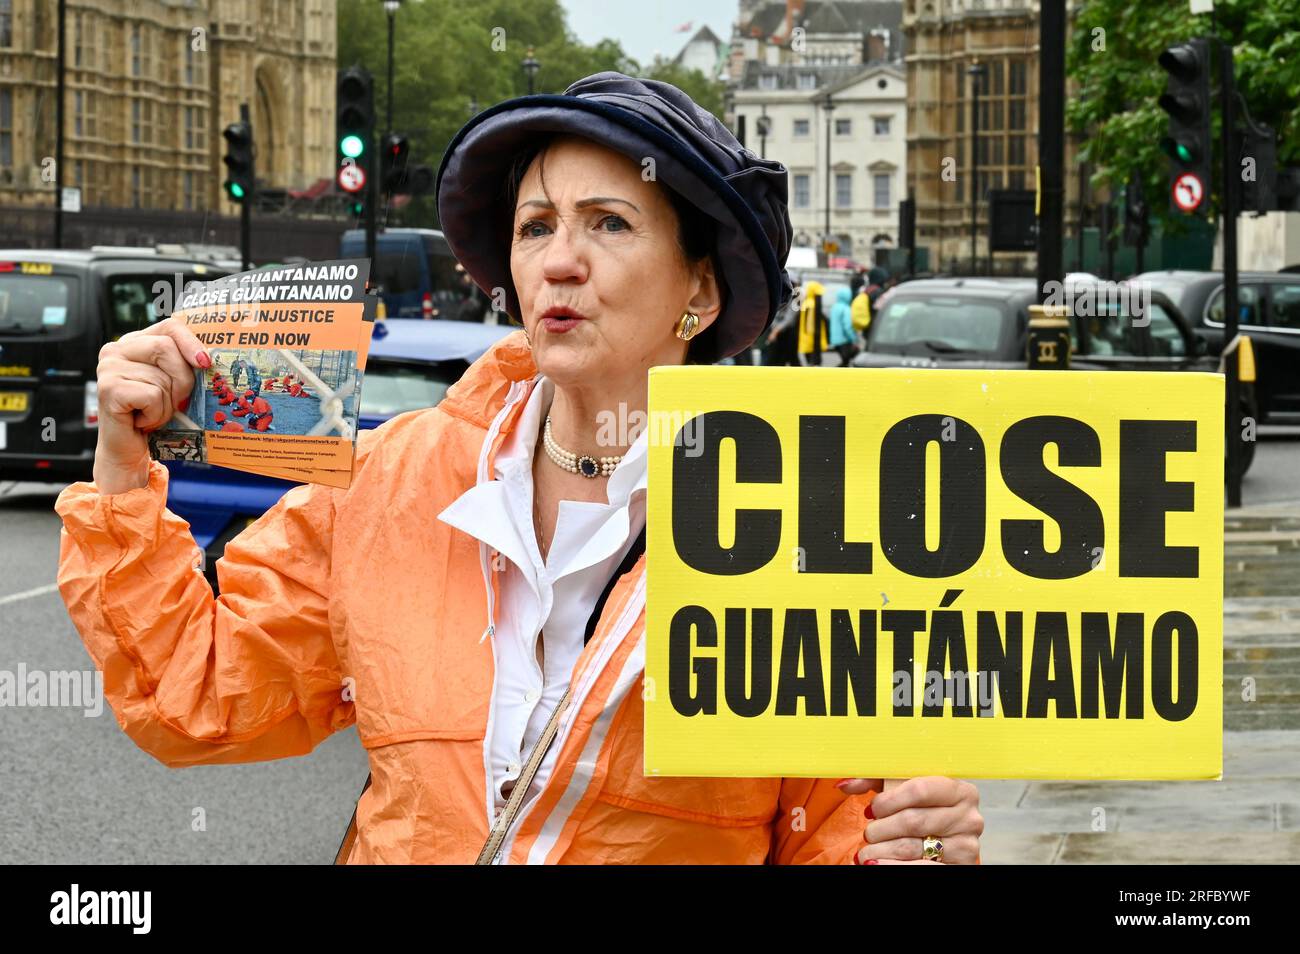 London, UK. Activists from the UK Guantanamo Network gathered opposite the Houses of Parliament to call for an end to 21 years of injustice and for the immediate closure of Guantanamo. Credit: michael melia/Alamy Live News Stock Photo